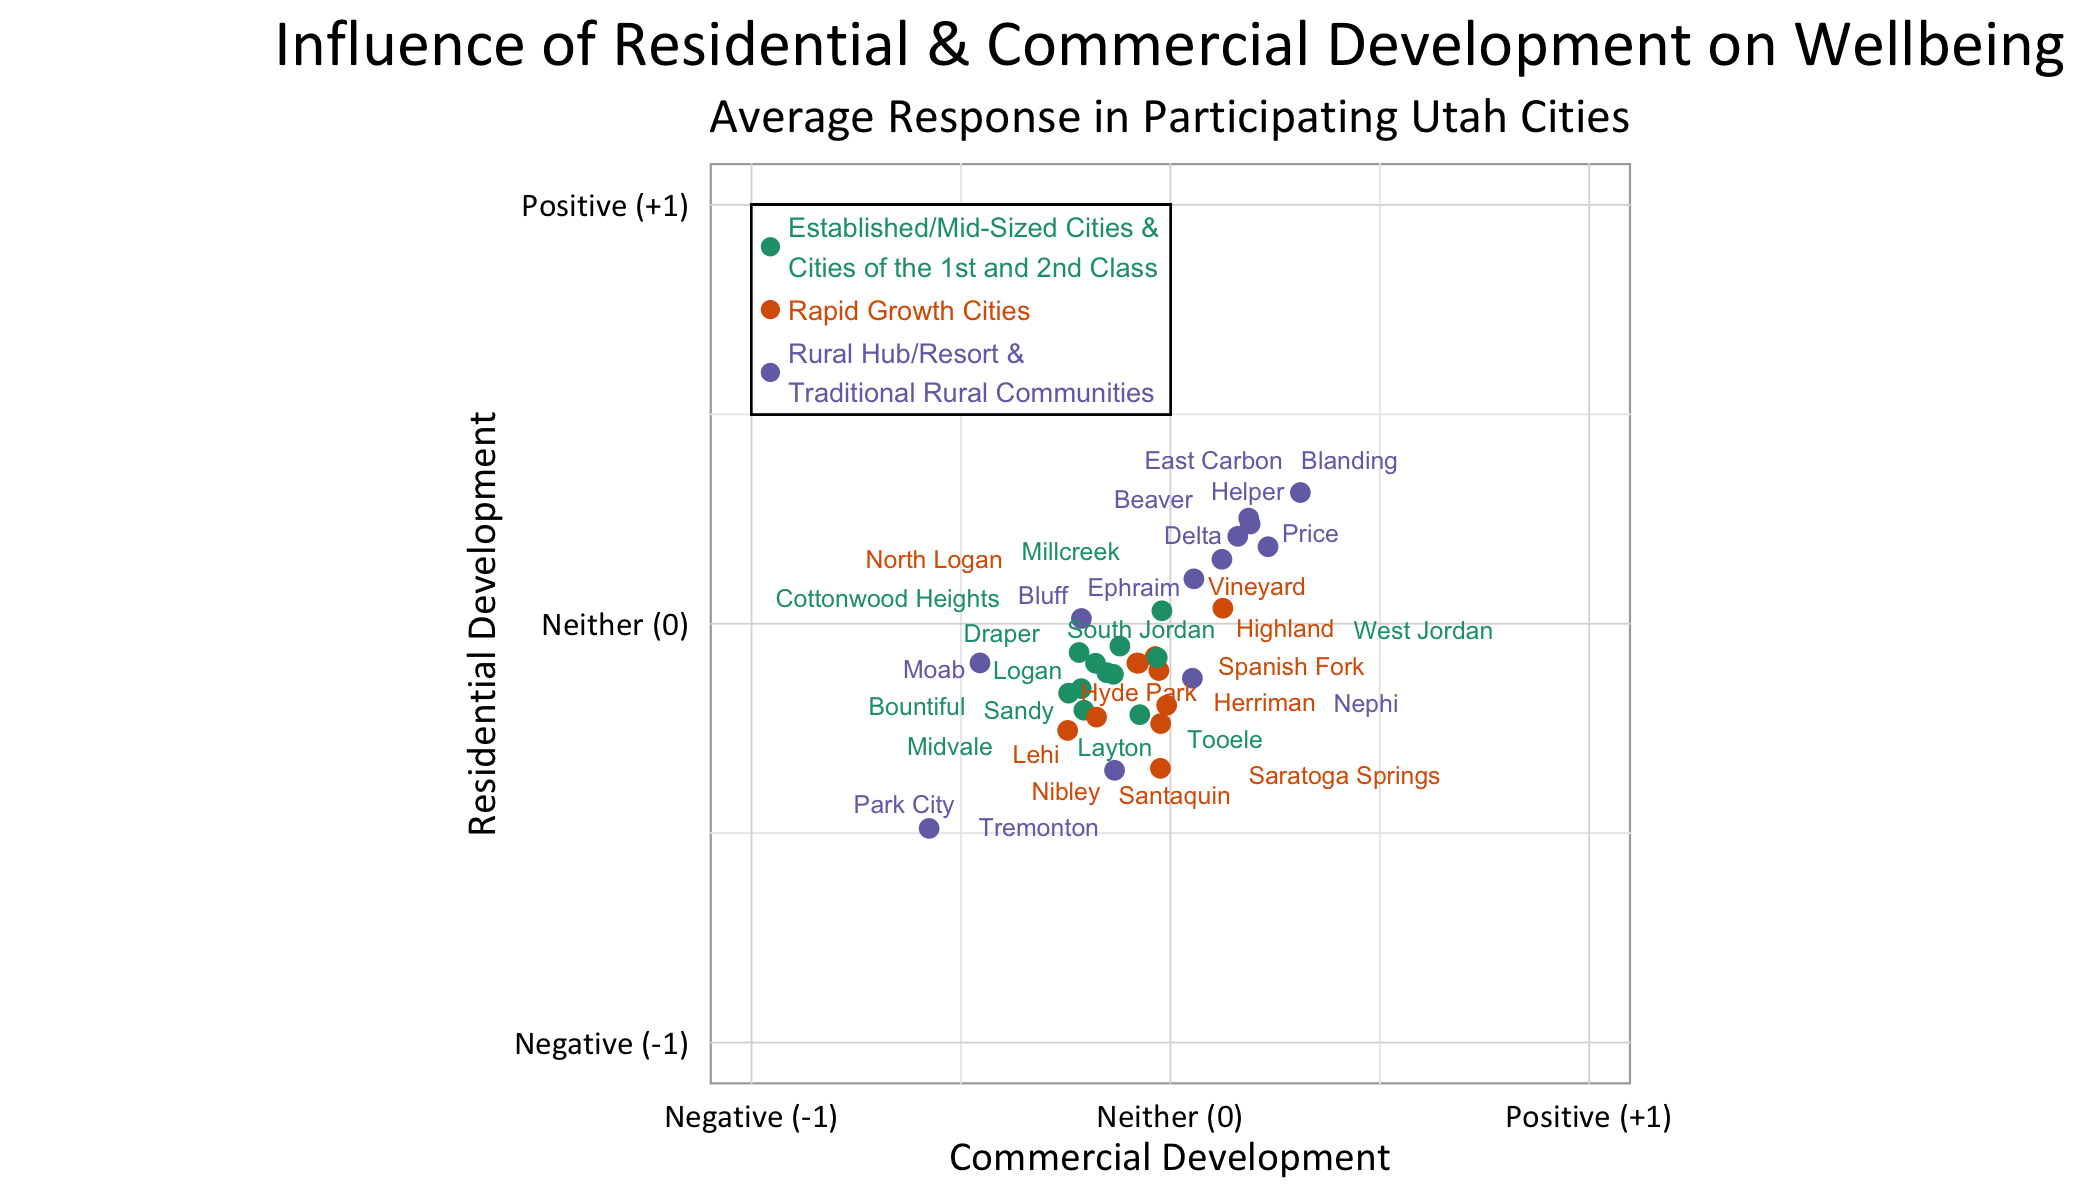 Type: Dot Plot. Title: Influence of Residential & Commericial Development on Wellbeing. Subtitle: Average Response in Participating Utah Cities. Data: Park Cities has the most negative perception of both types of development. Blanding has the most positive. No clear trend in between.